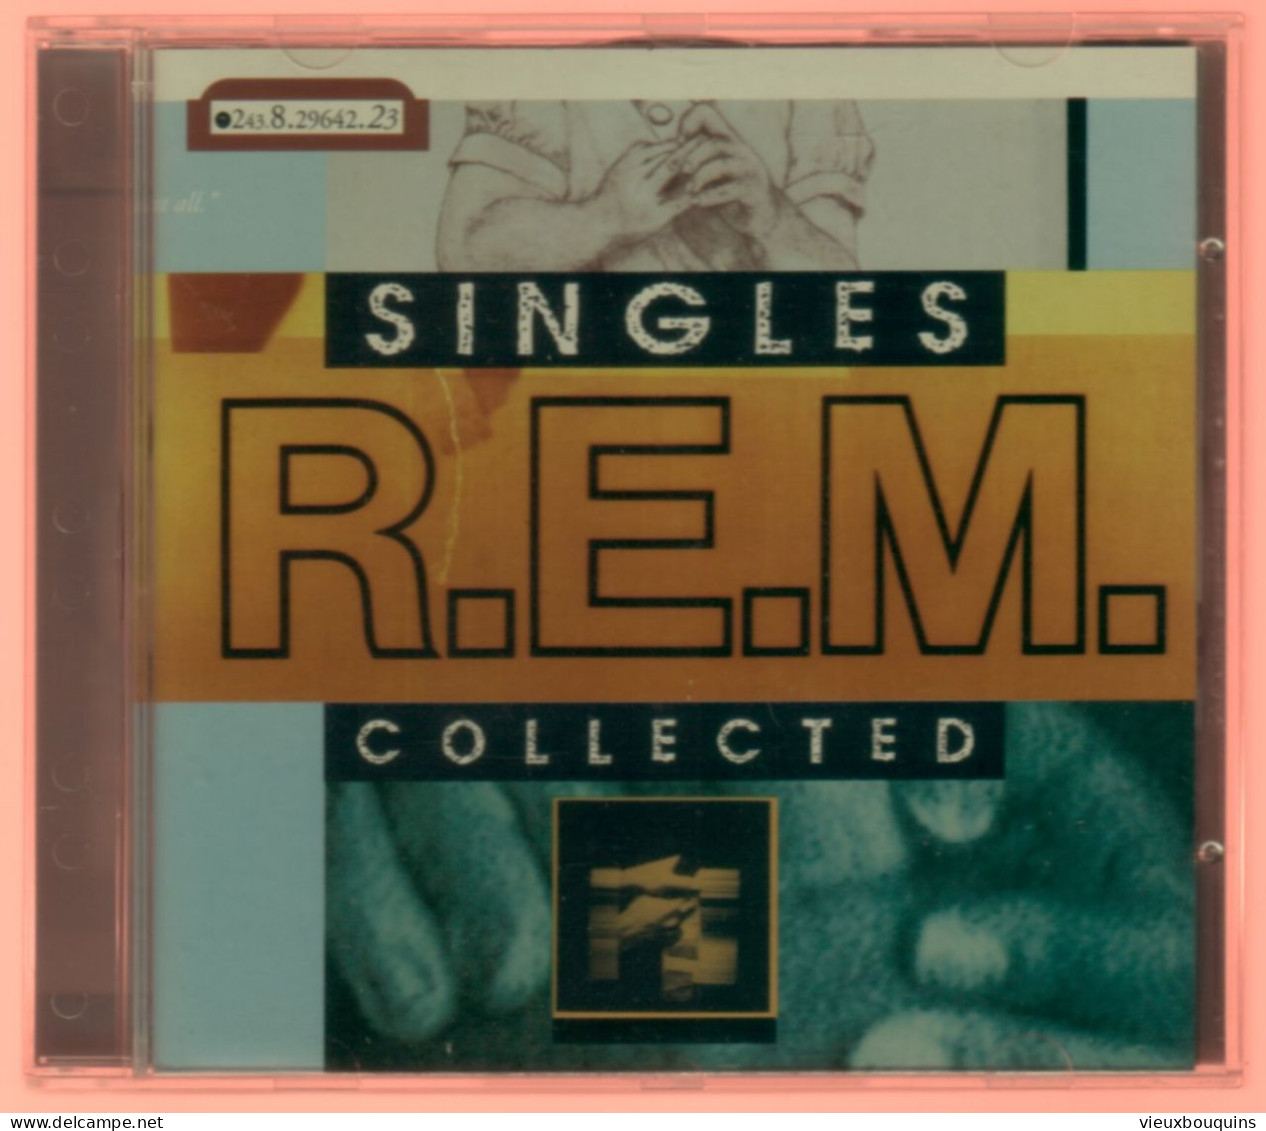 R.E.M : SINGLES COLLECTED (voir Titres Sur Scan) - Other - English Music